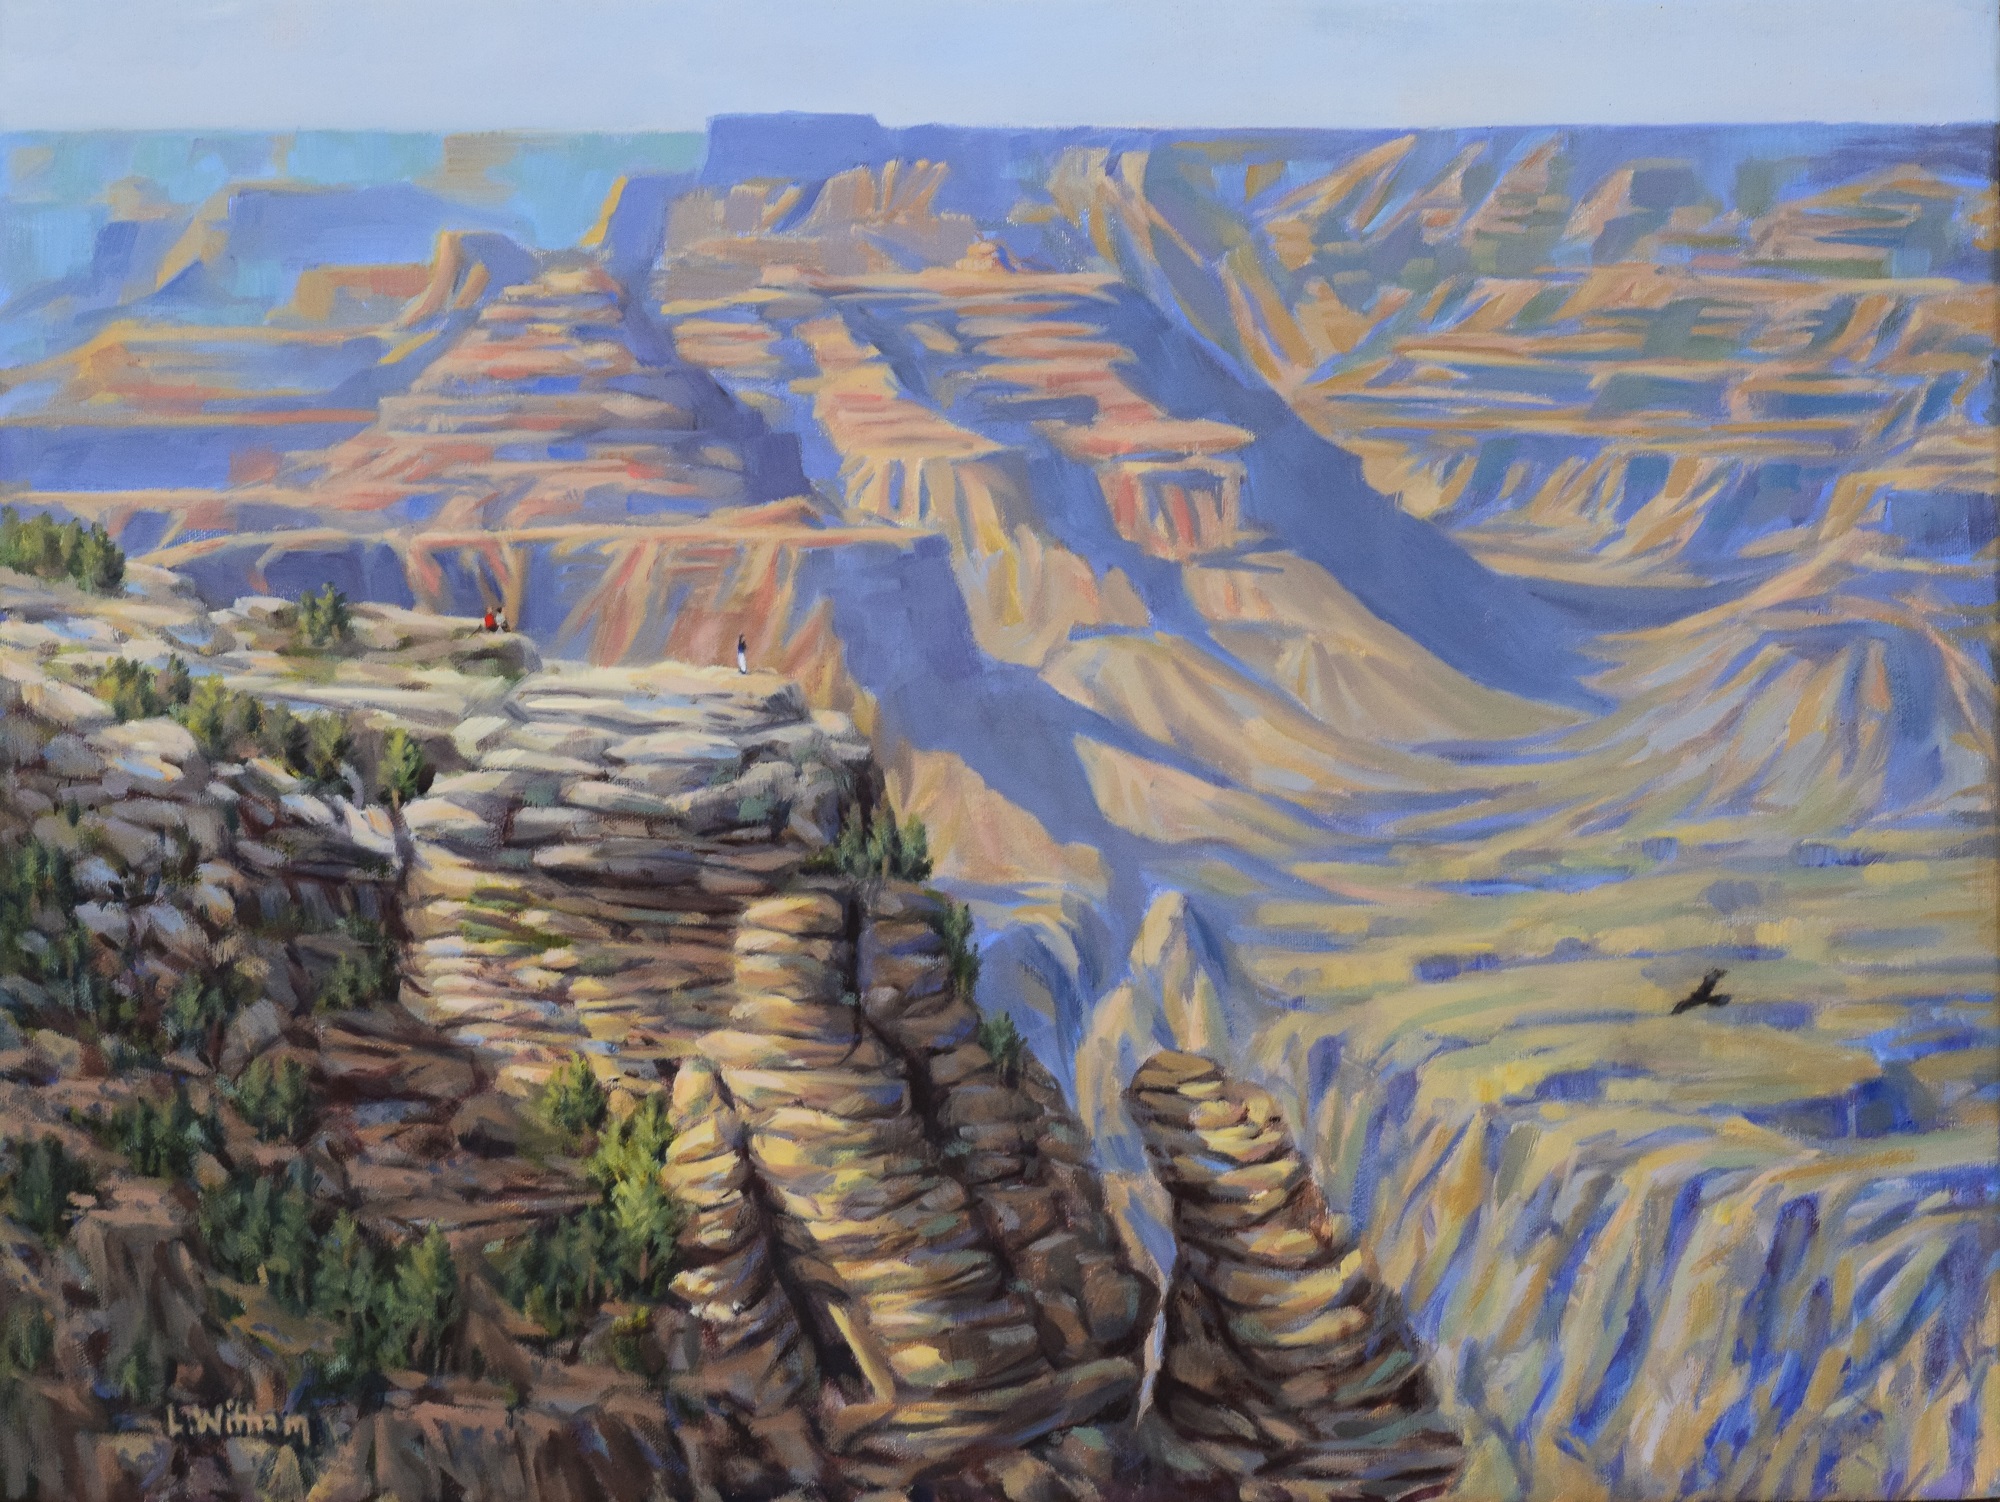 Grand Canyon, Oil on canvas, 18x24